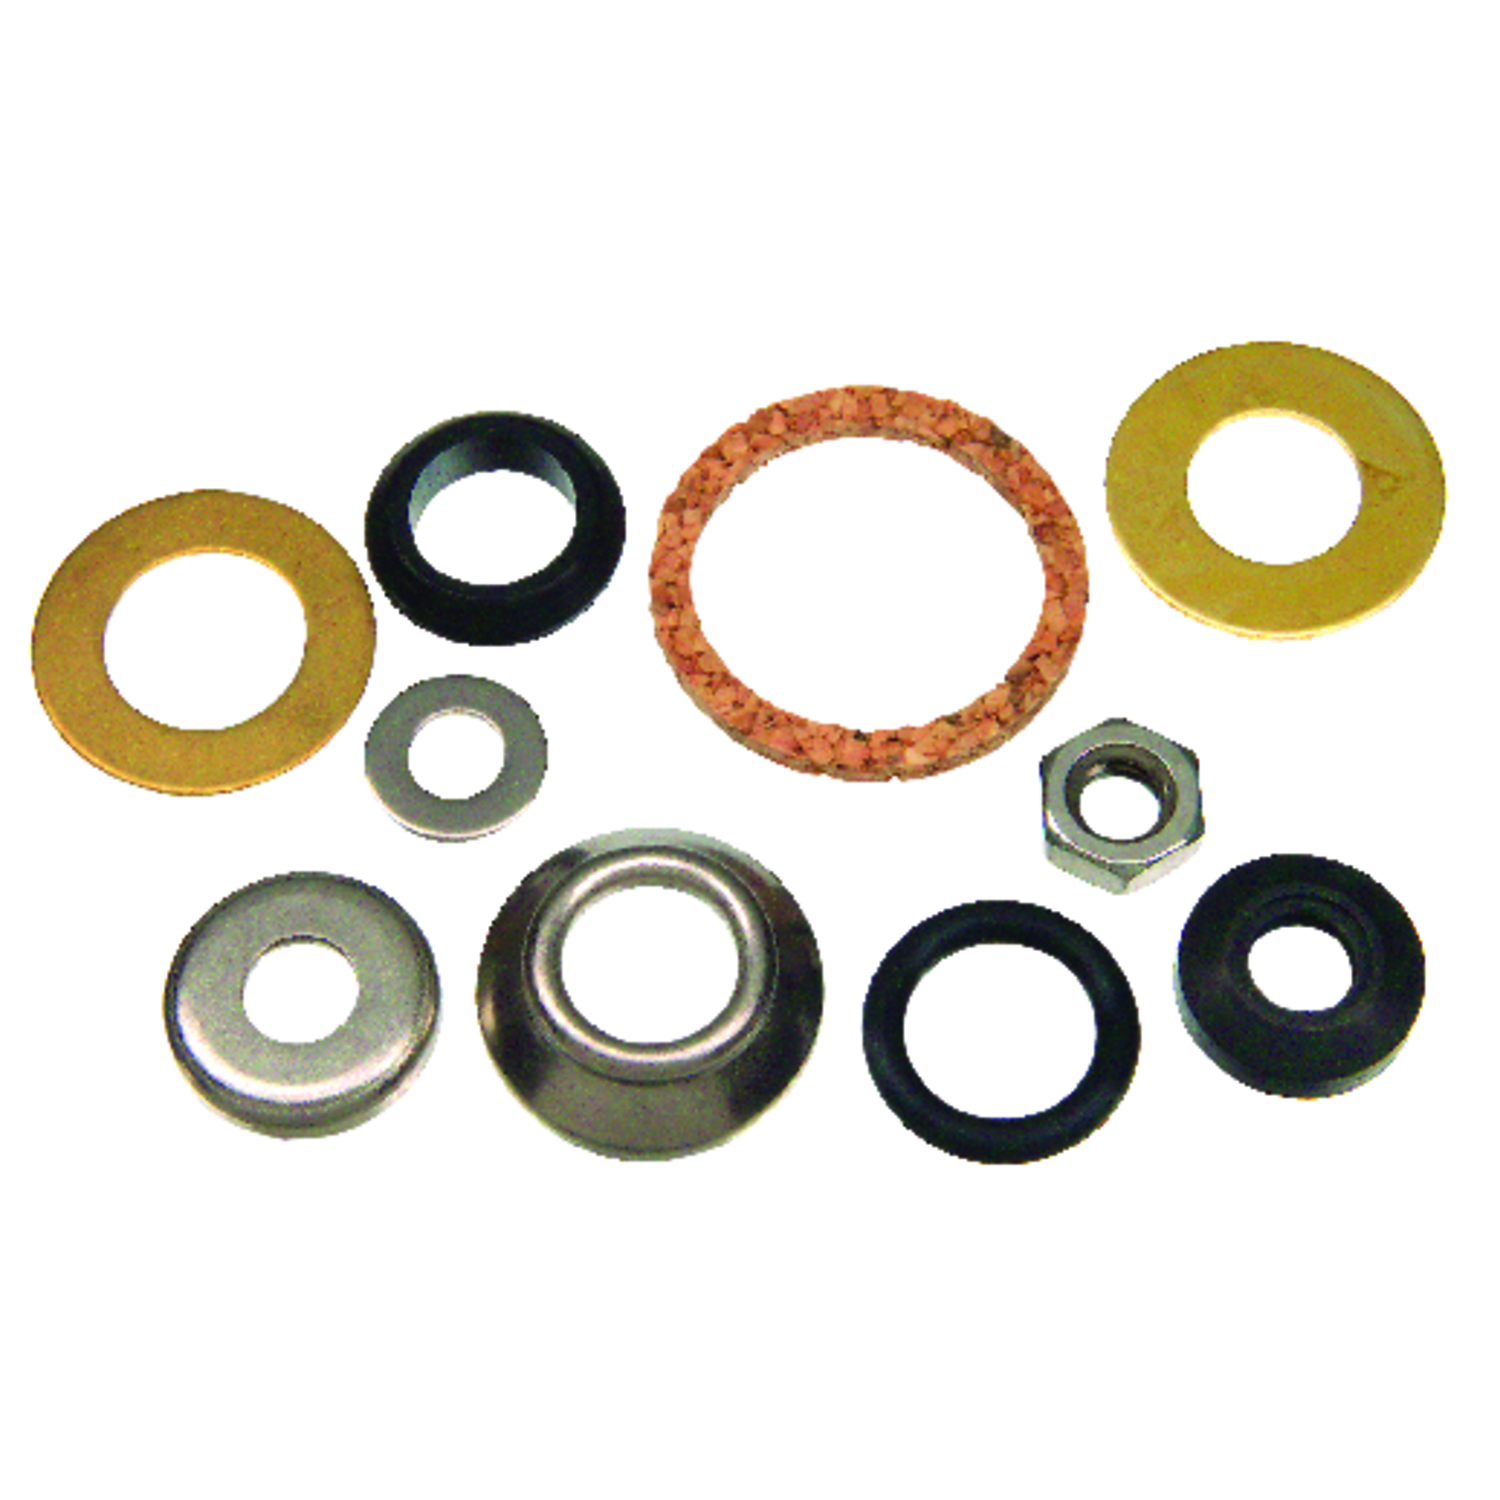 Ace 6S-2, 6S-3, 6S-4 Hot and Cold Stem Repair Kit For Chicago Faucets -  A0080047